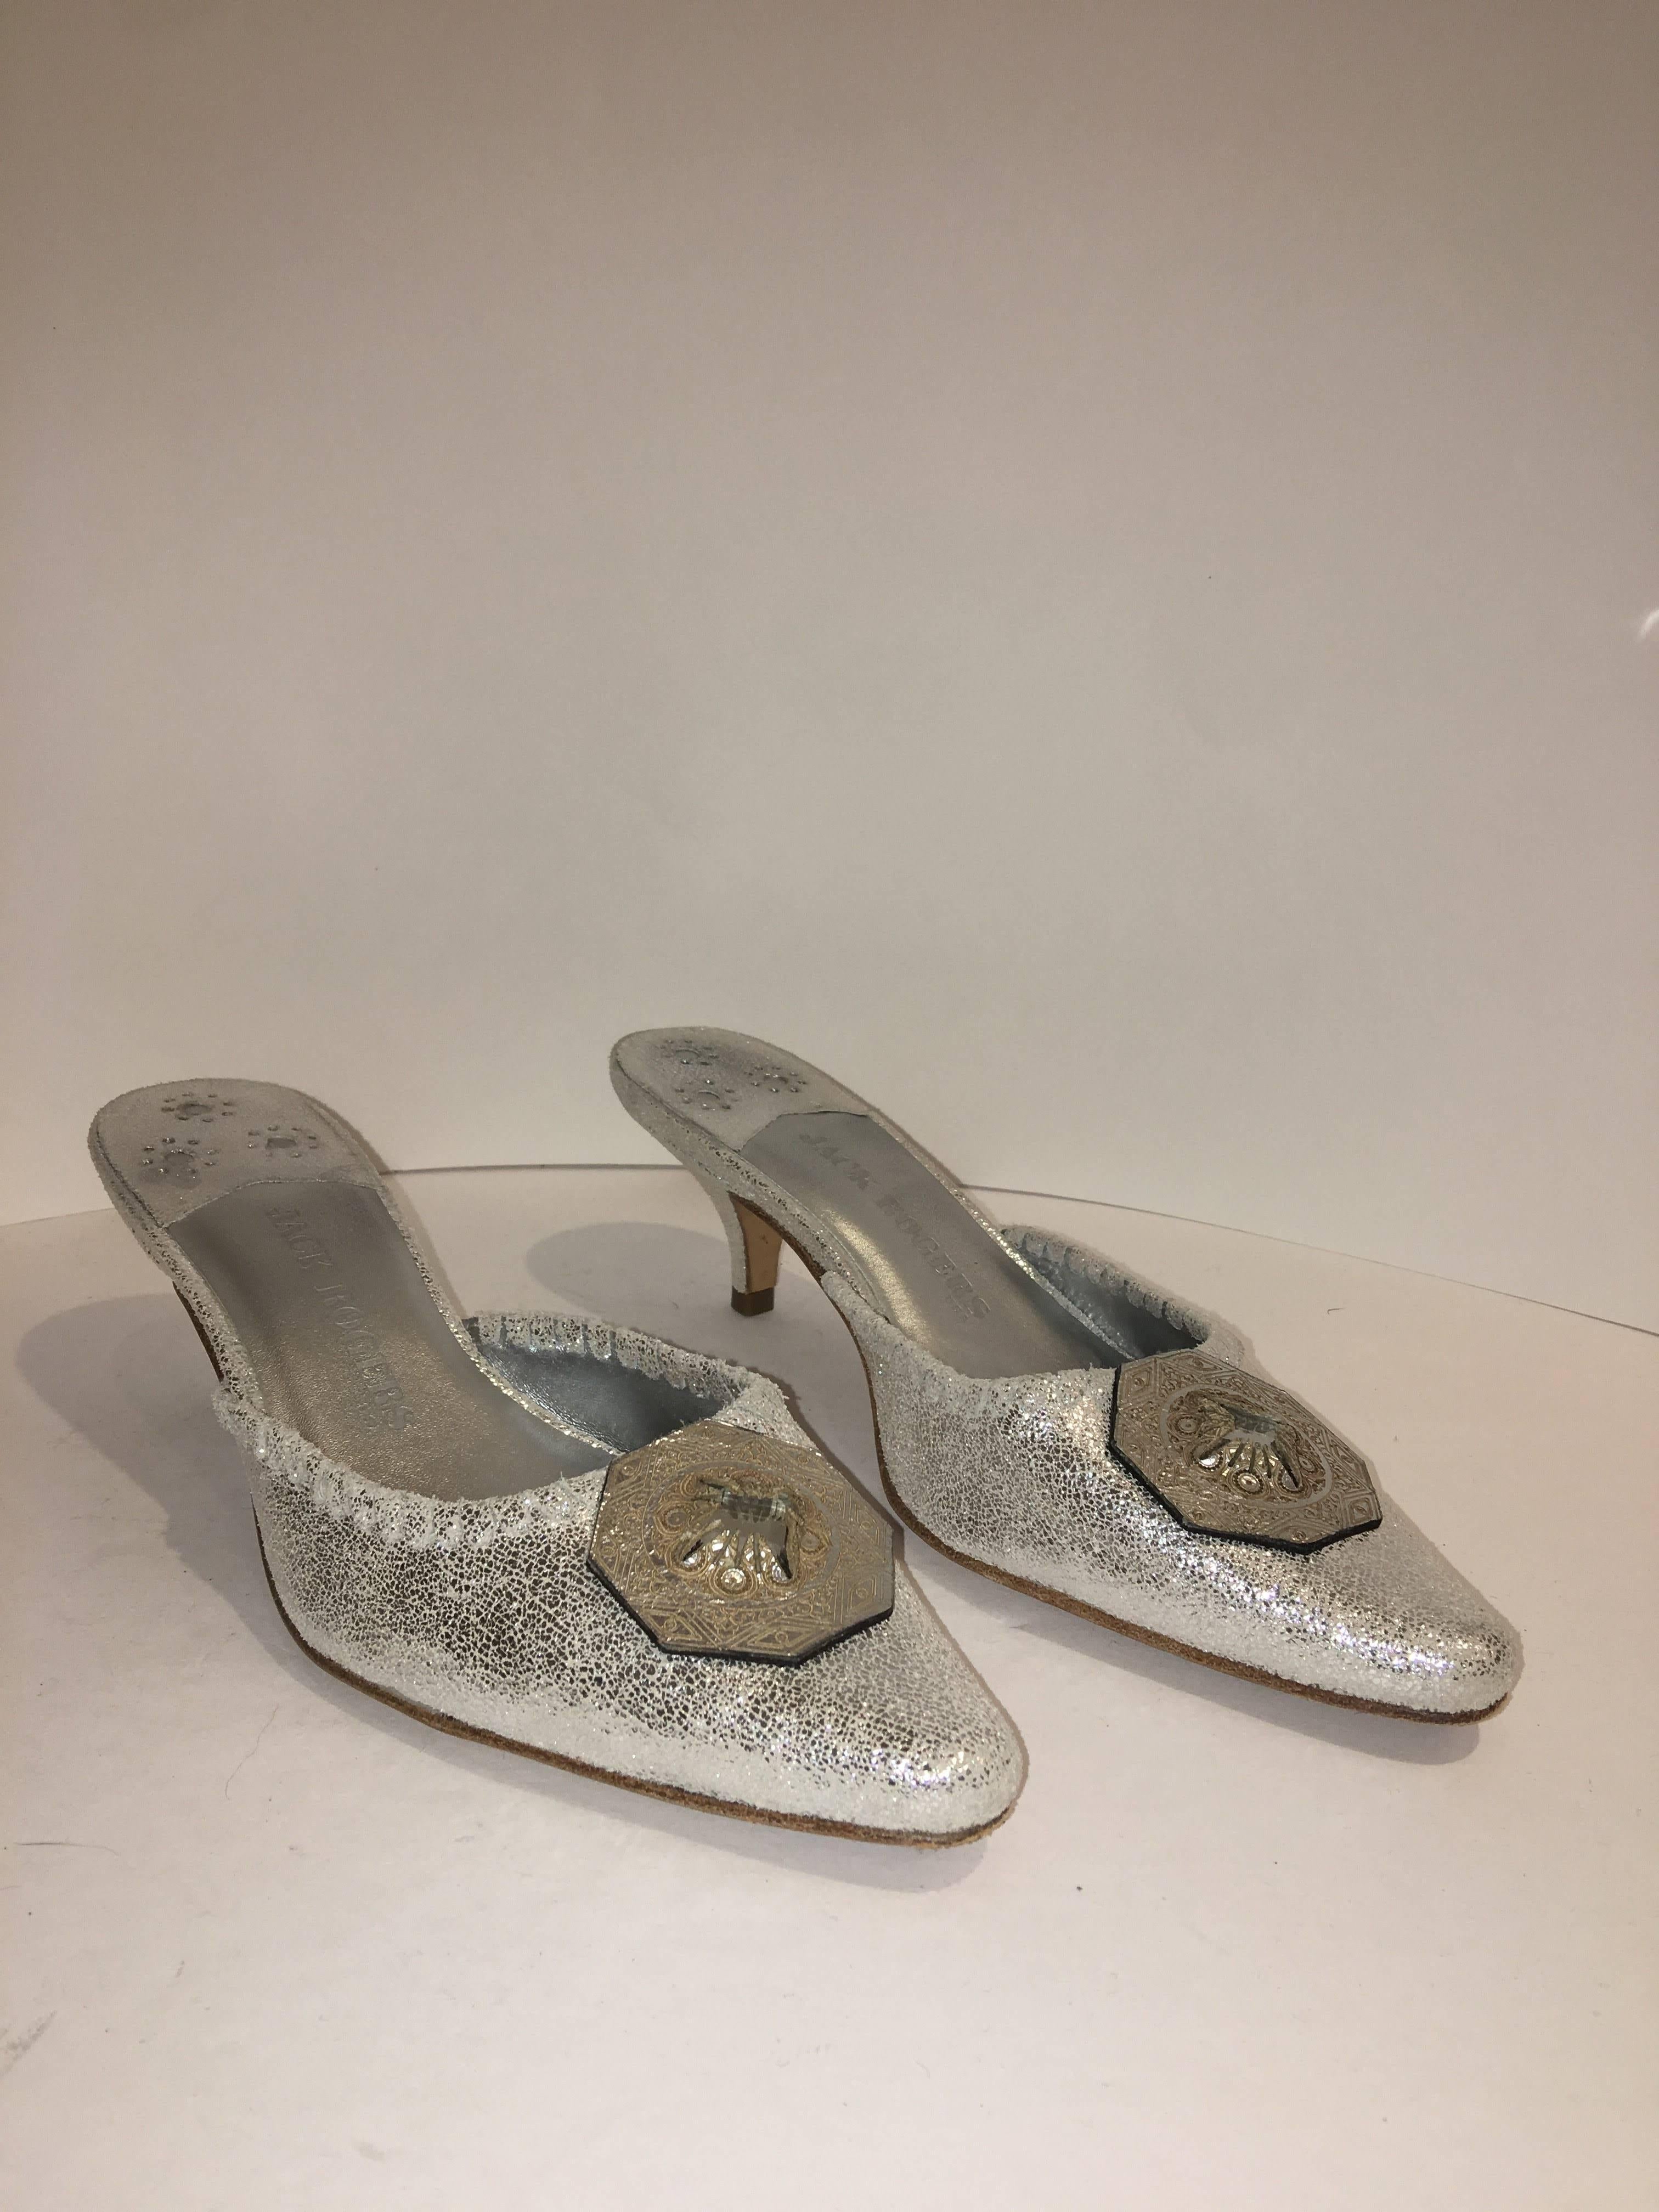 Jack Rogers Pointed Toe Slides with Kitten heel and Silver Rhinestone. Silver Leather in a size 8.